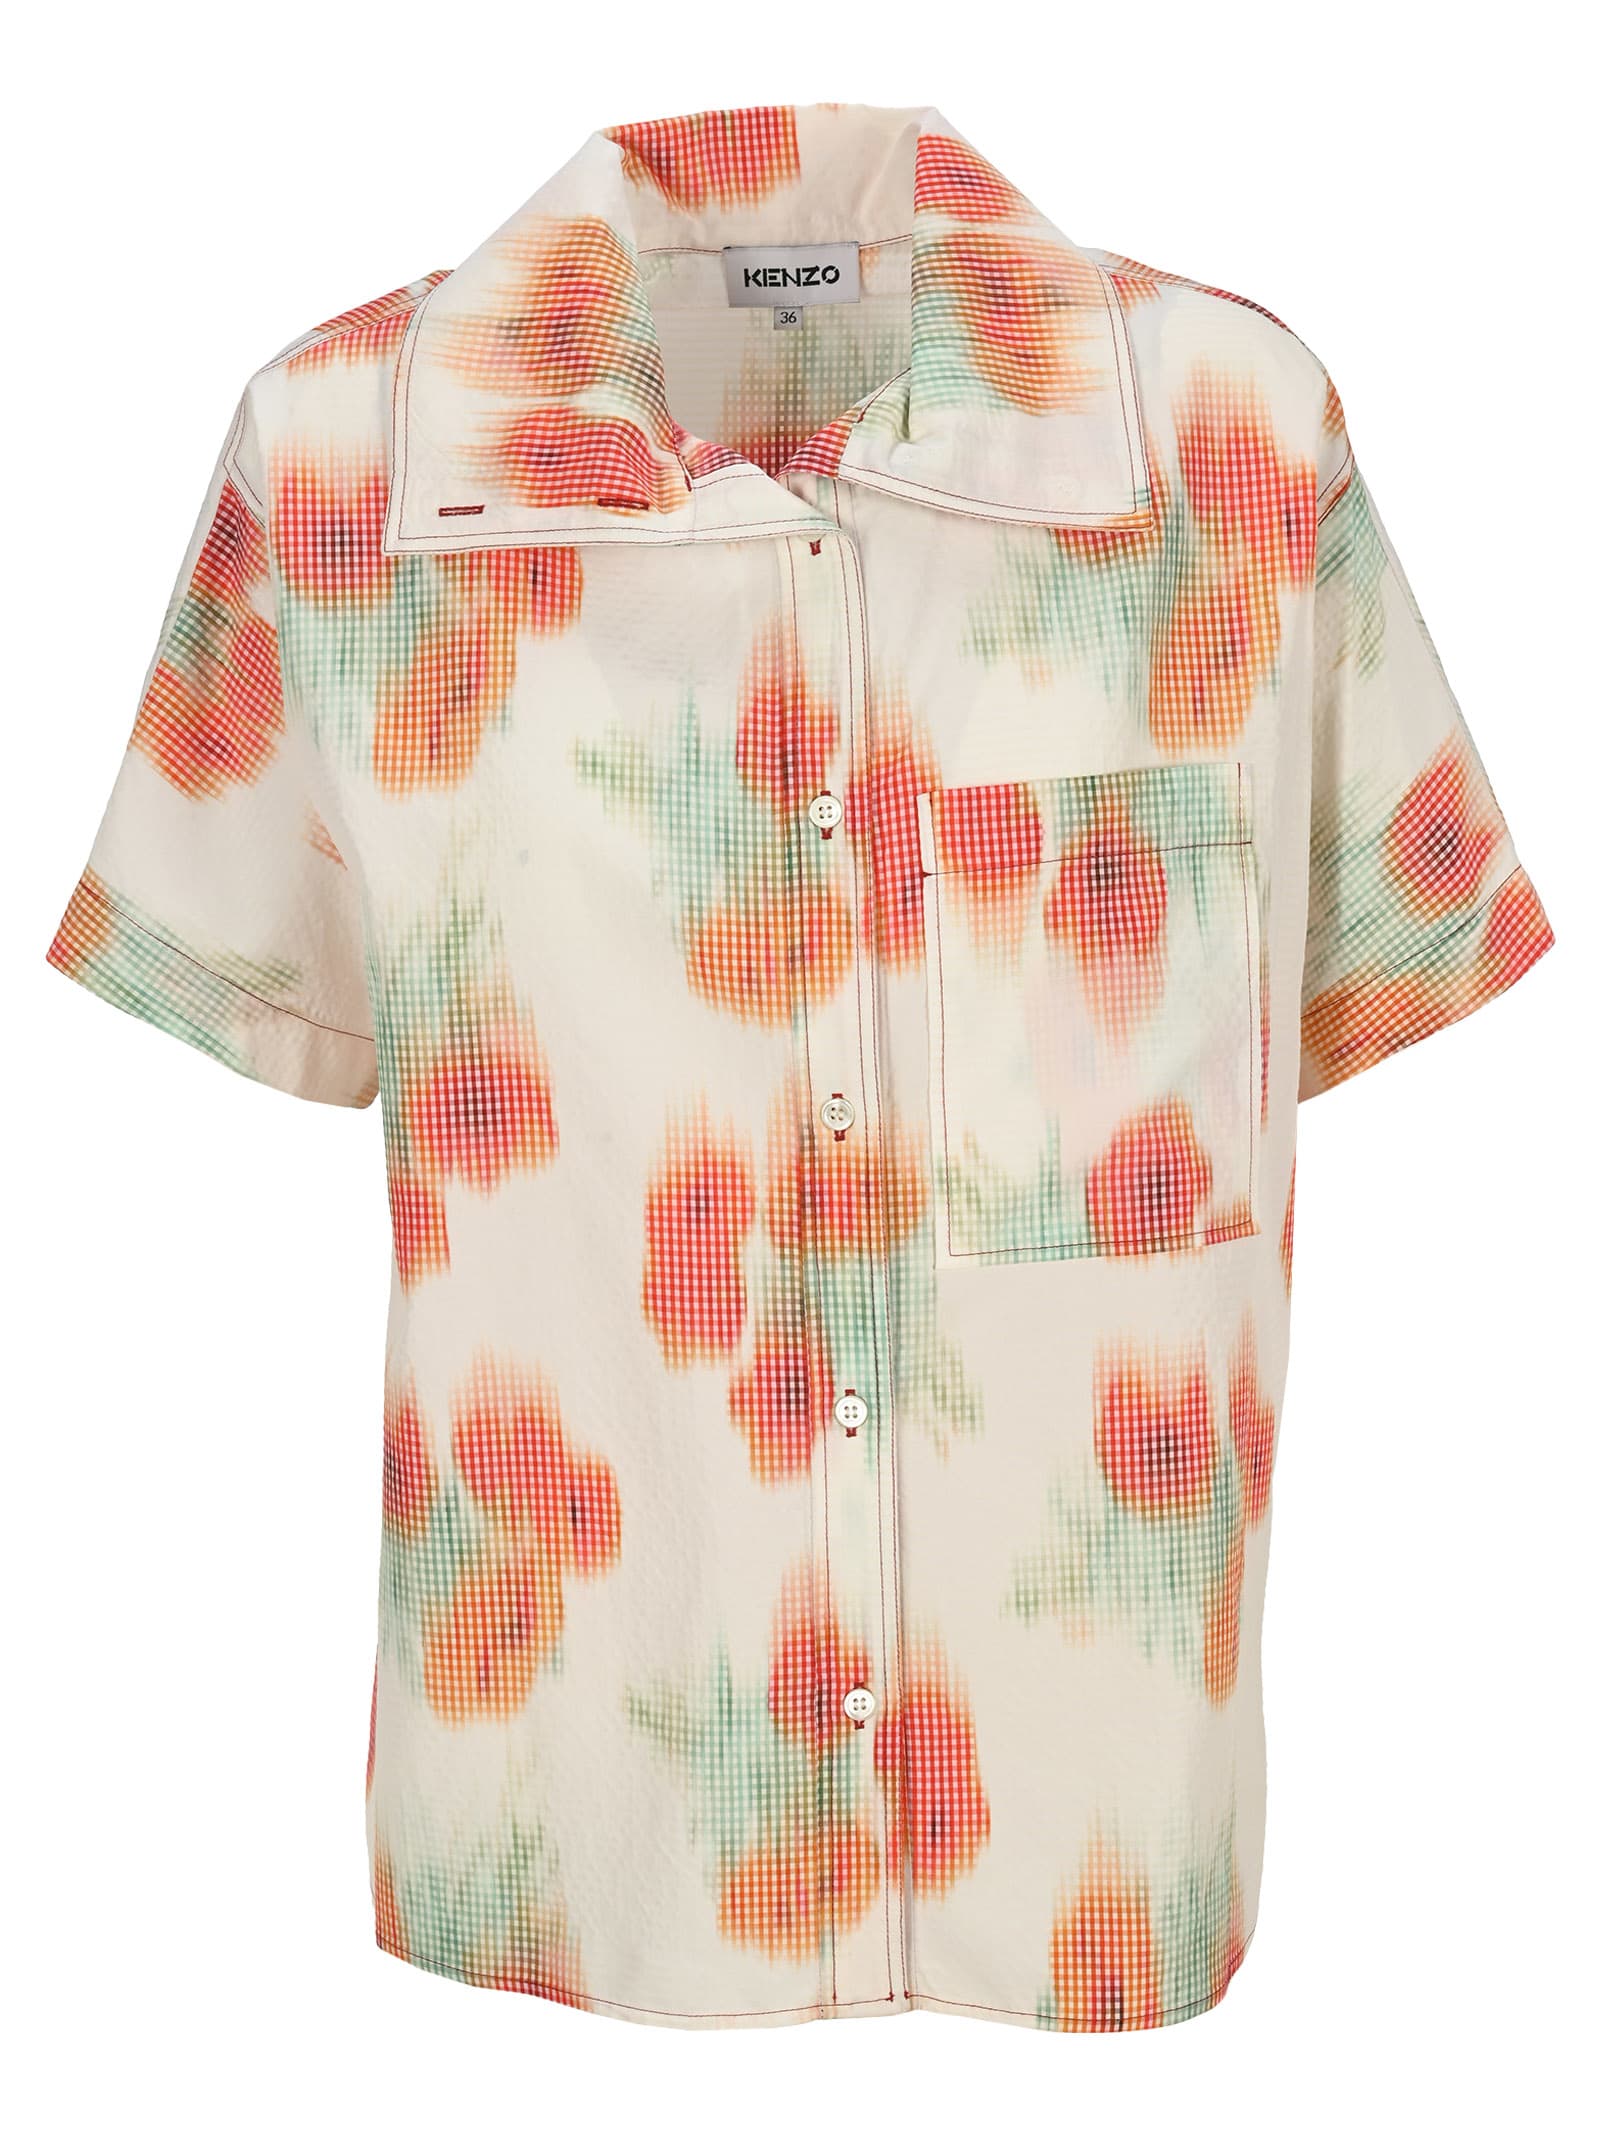 KENZO COQUELICOT CASUAL SHIRT,FB52CH0409S419